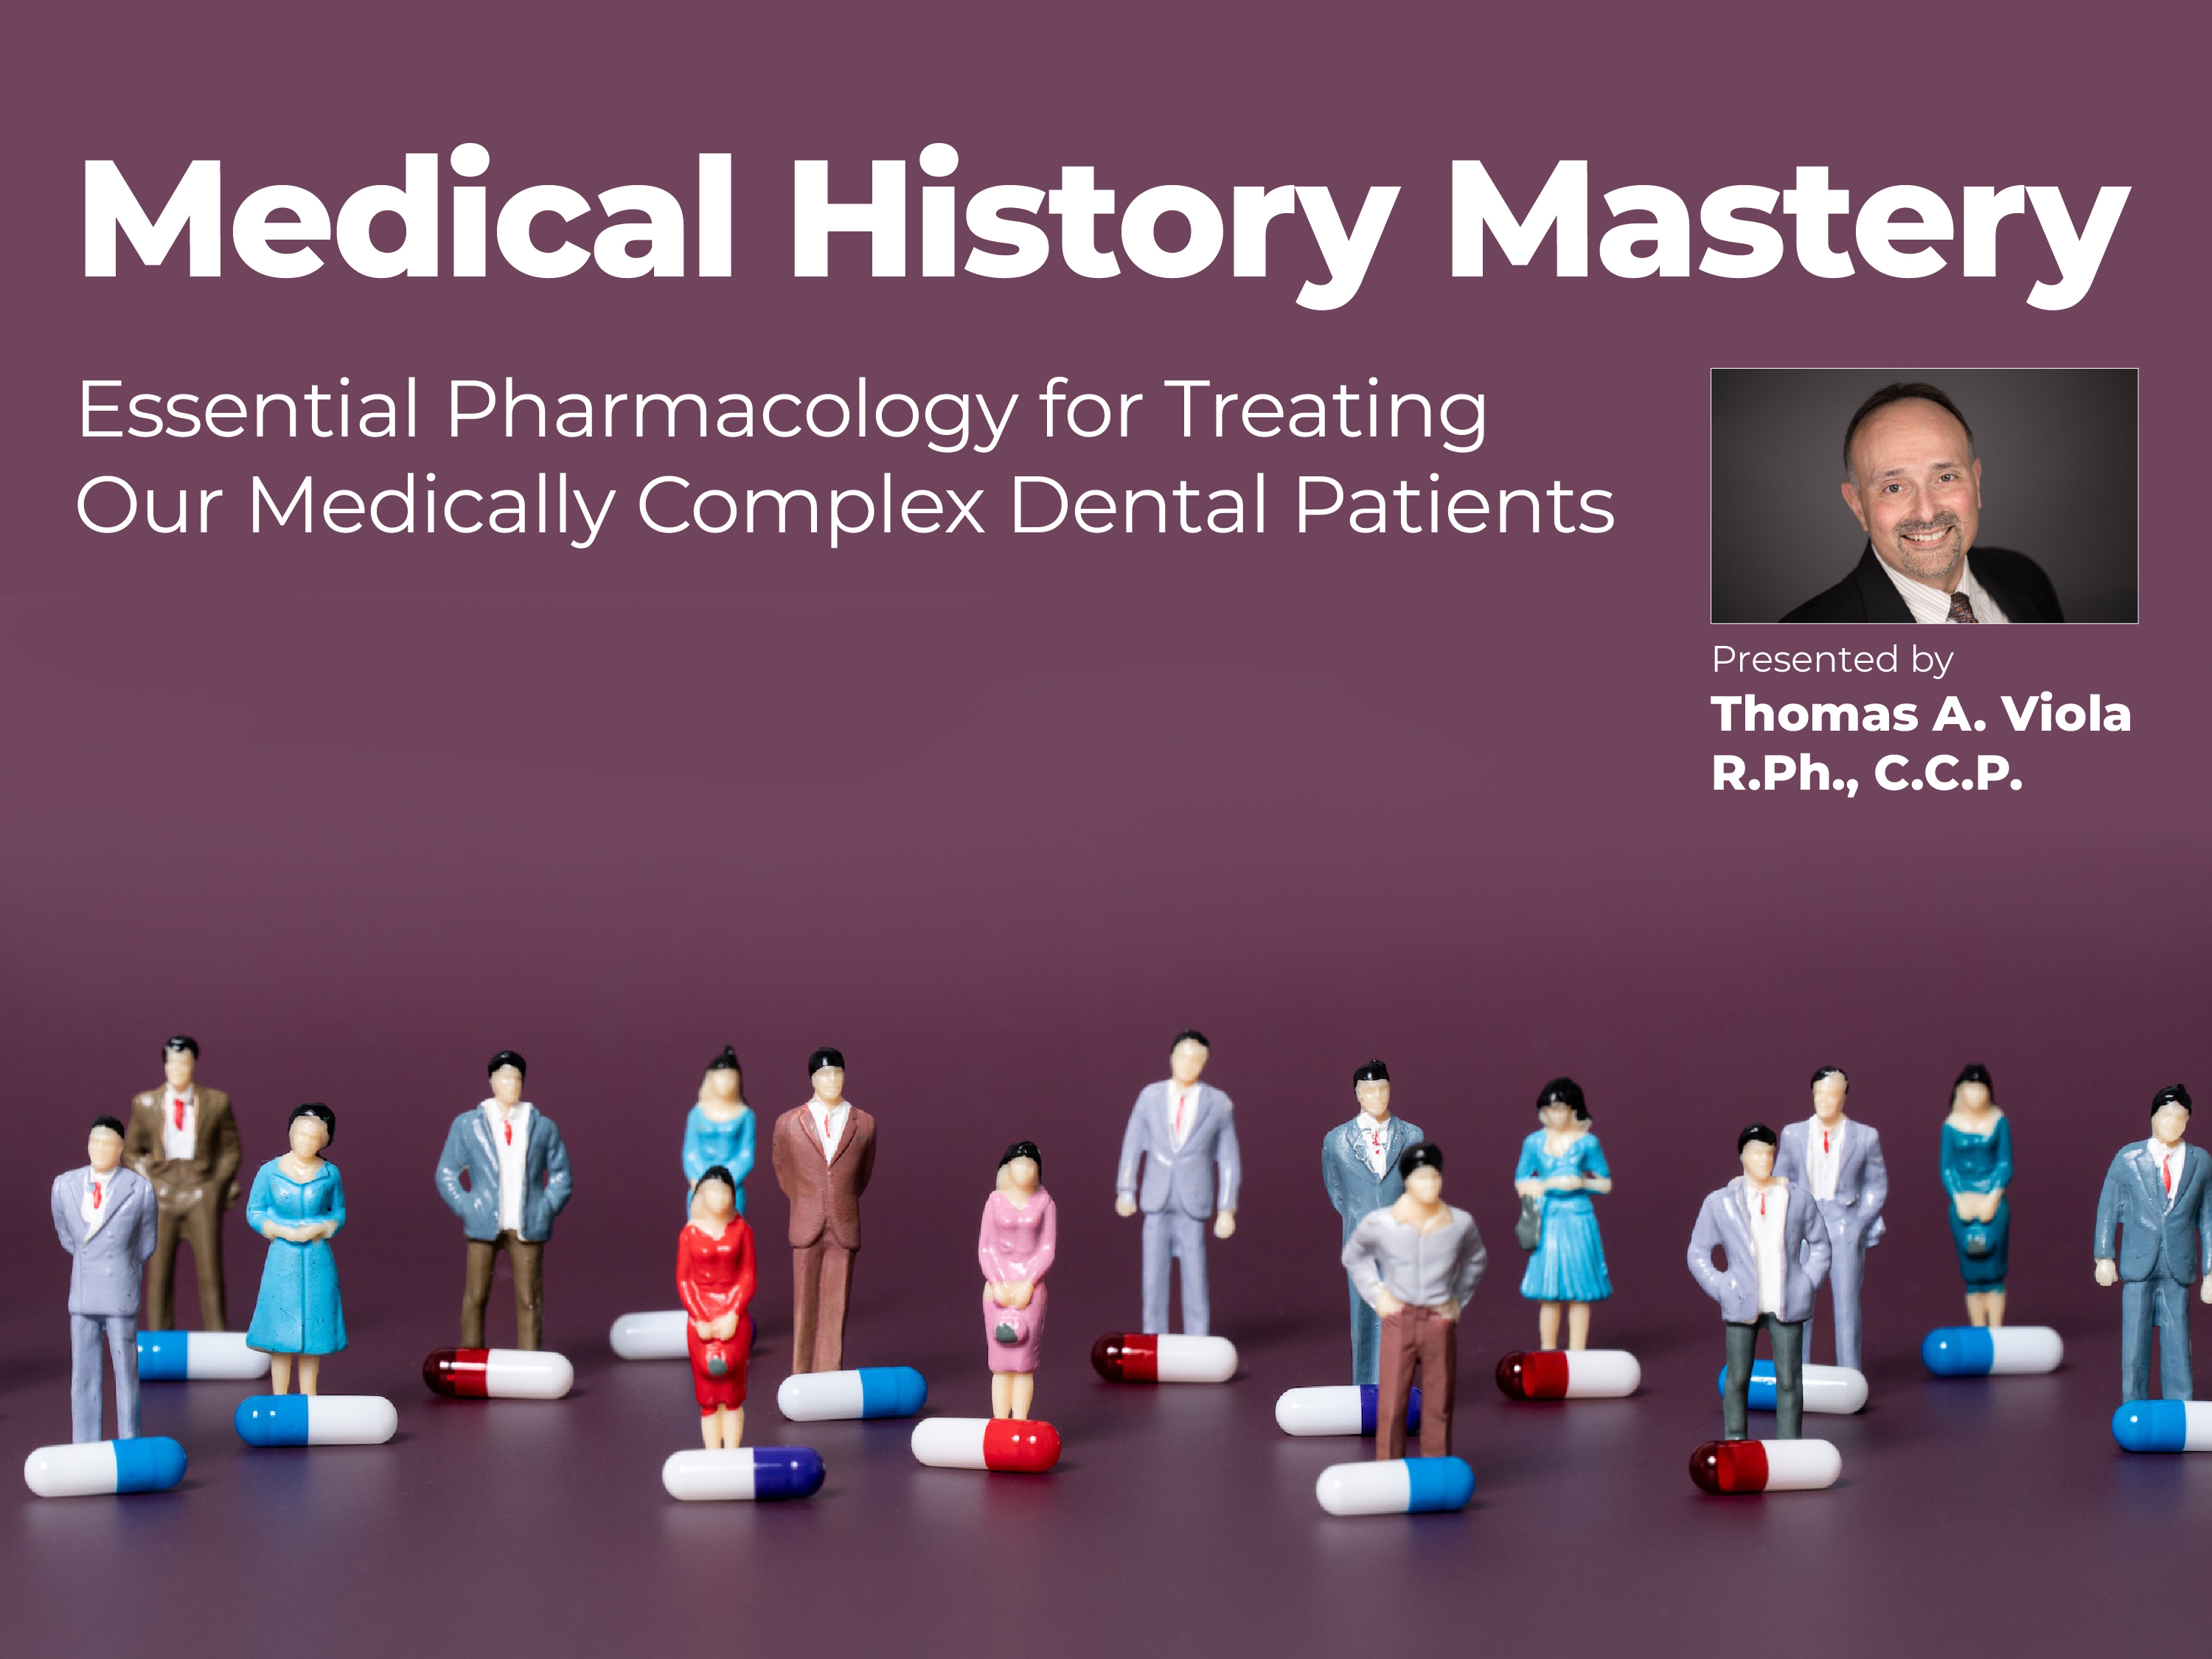 Medical History Mastery: Essential Pharmacology for Treating Our Medically Complex Dental Patients